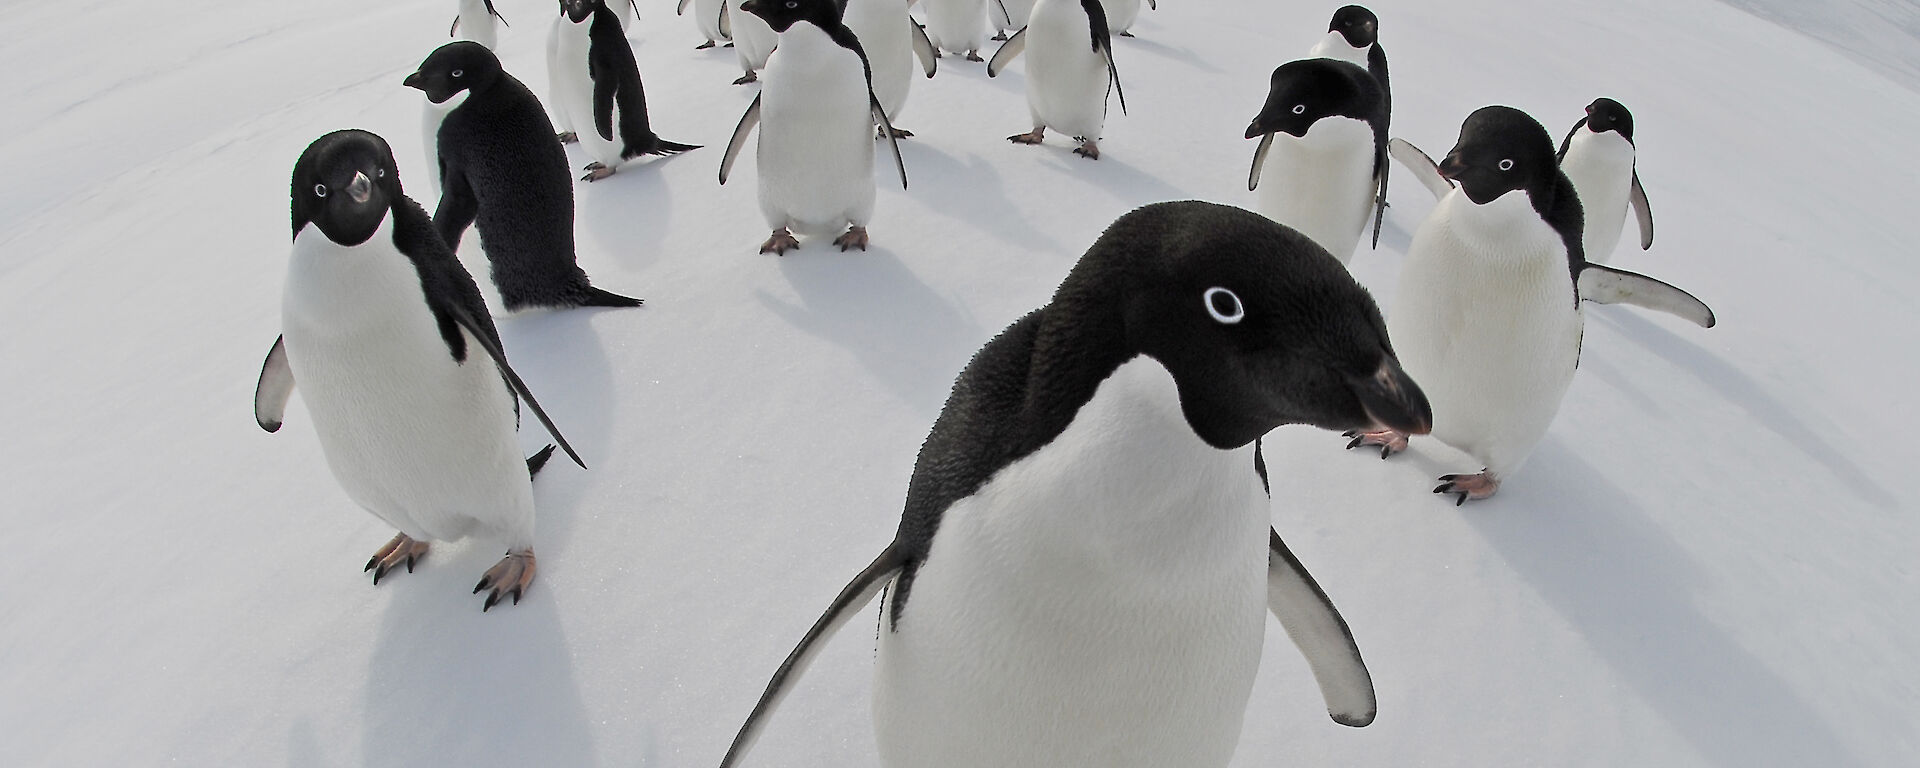 The curve of the horizon can be seen, with penguins really close to the camera lens.